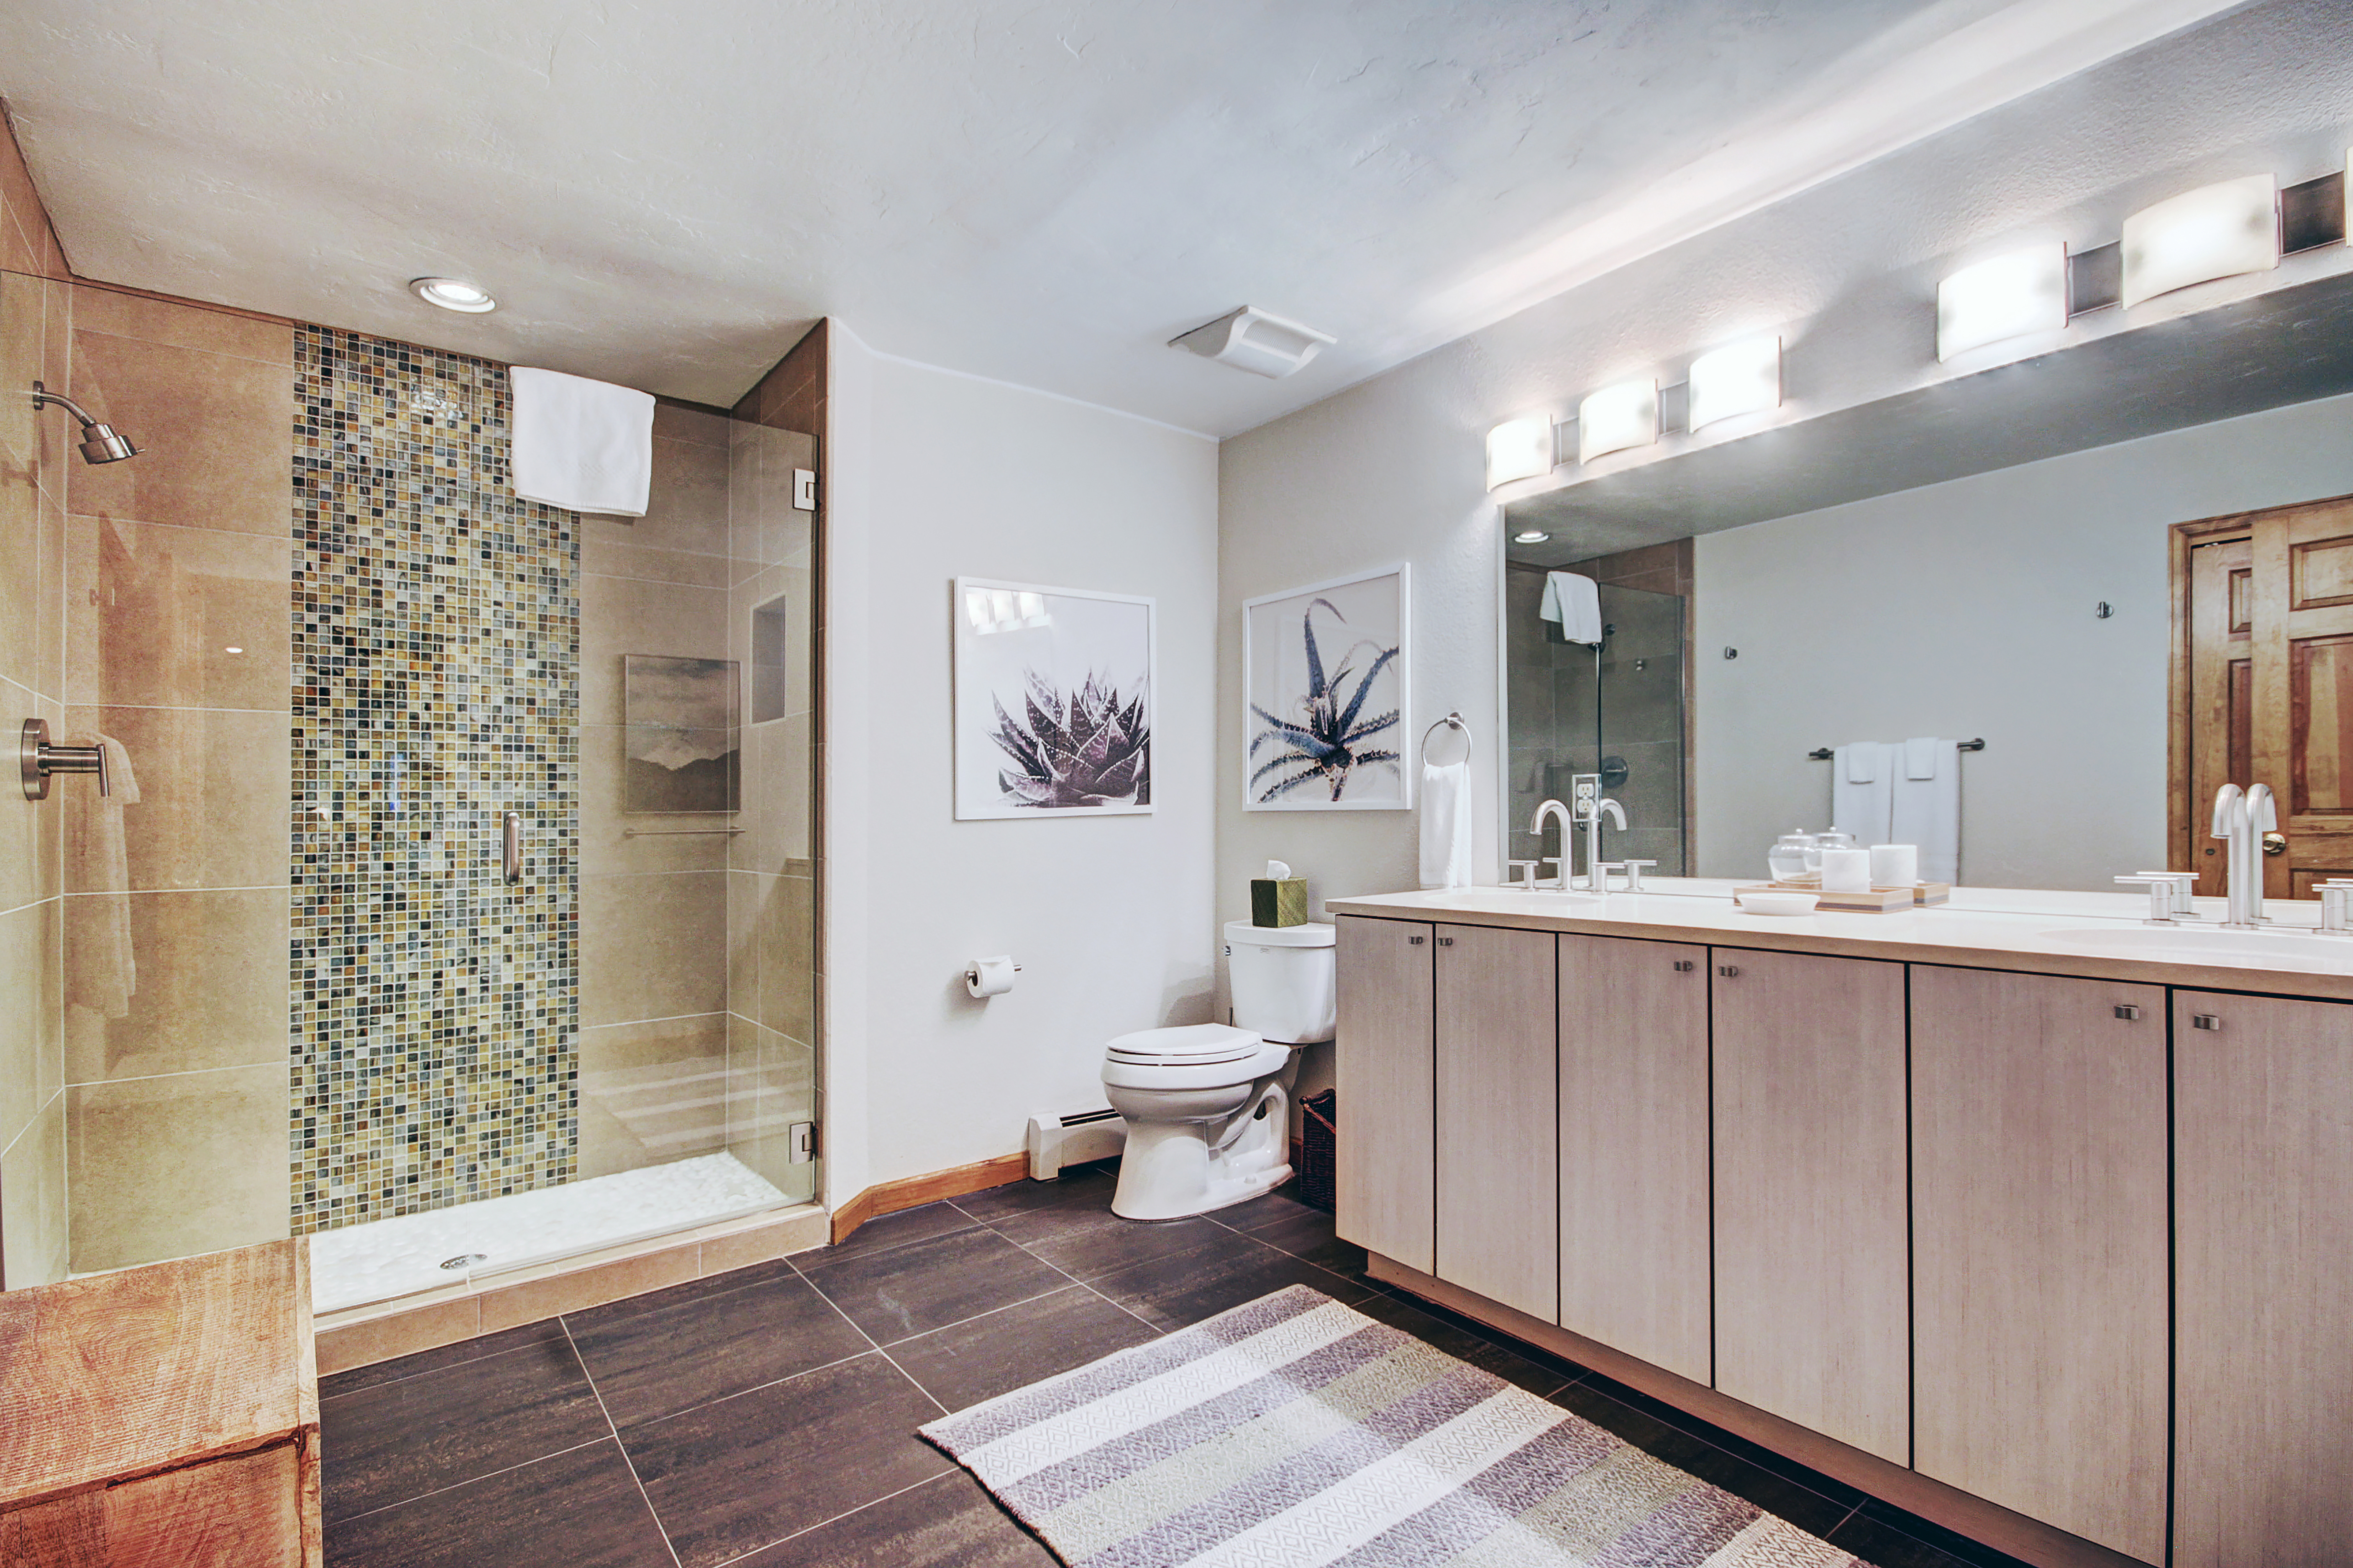 Lower level shared bathroom with walk-in shower and 2 sinks - 10 Southface Breckenridge Vacation Rental